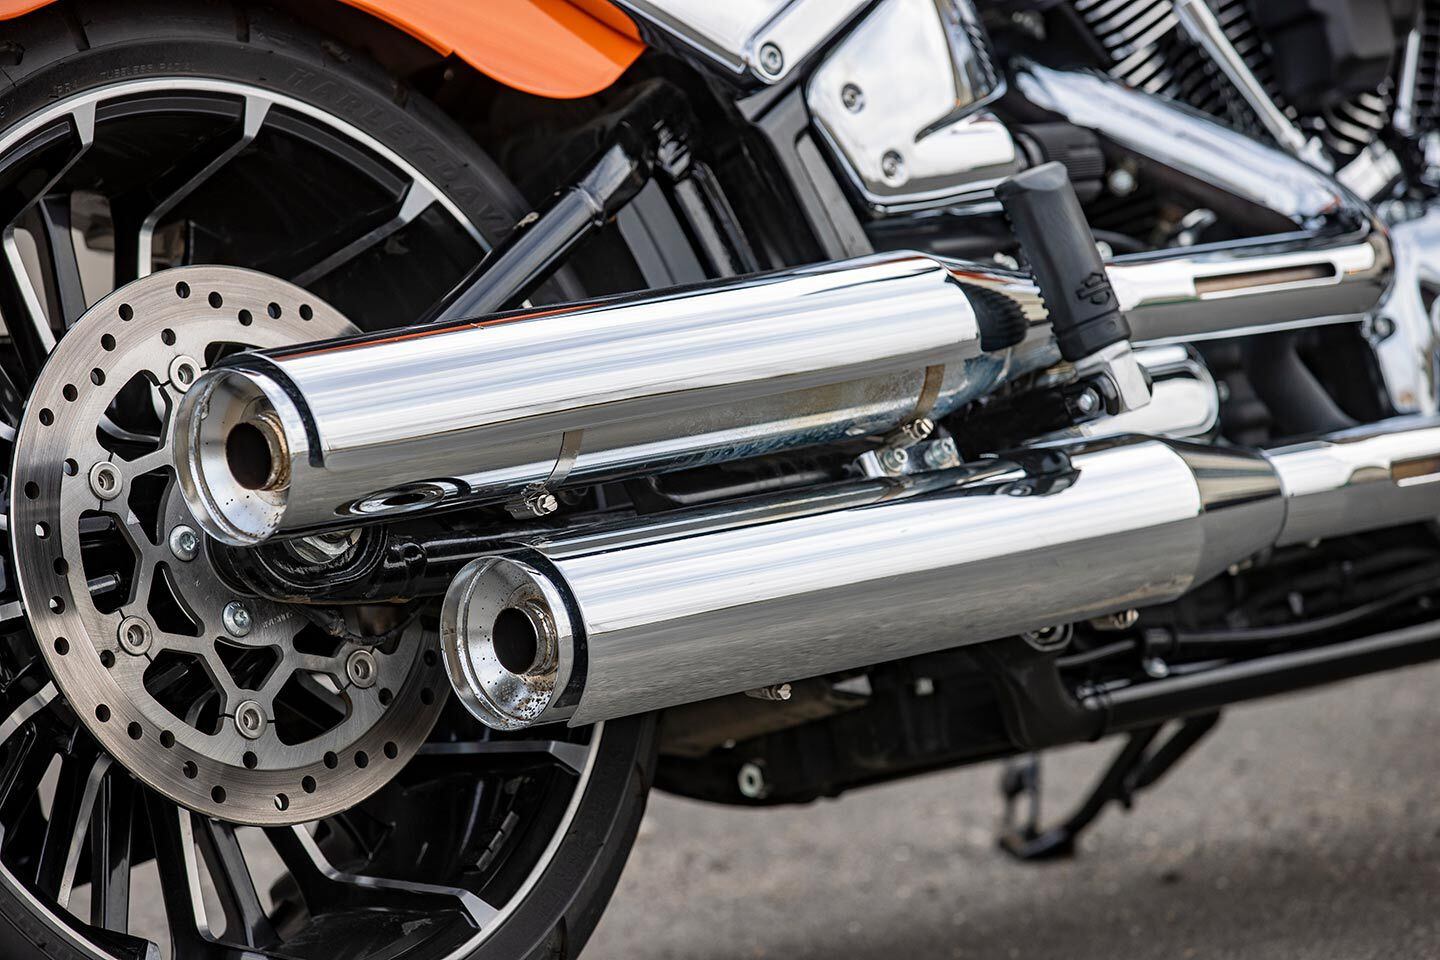 Exhausts are catalyst equipped.